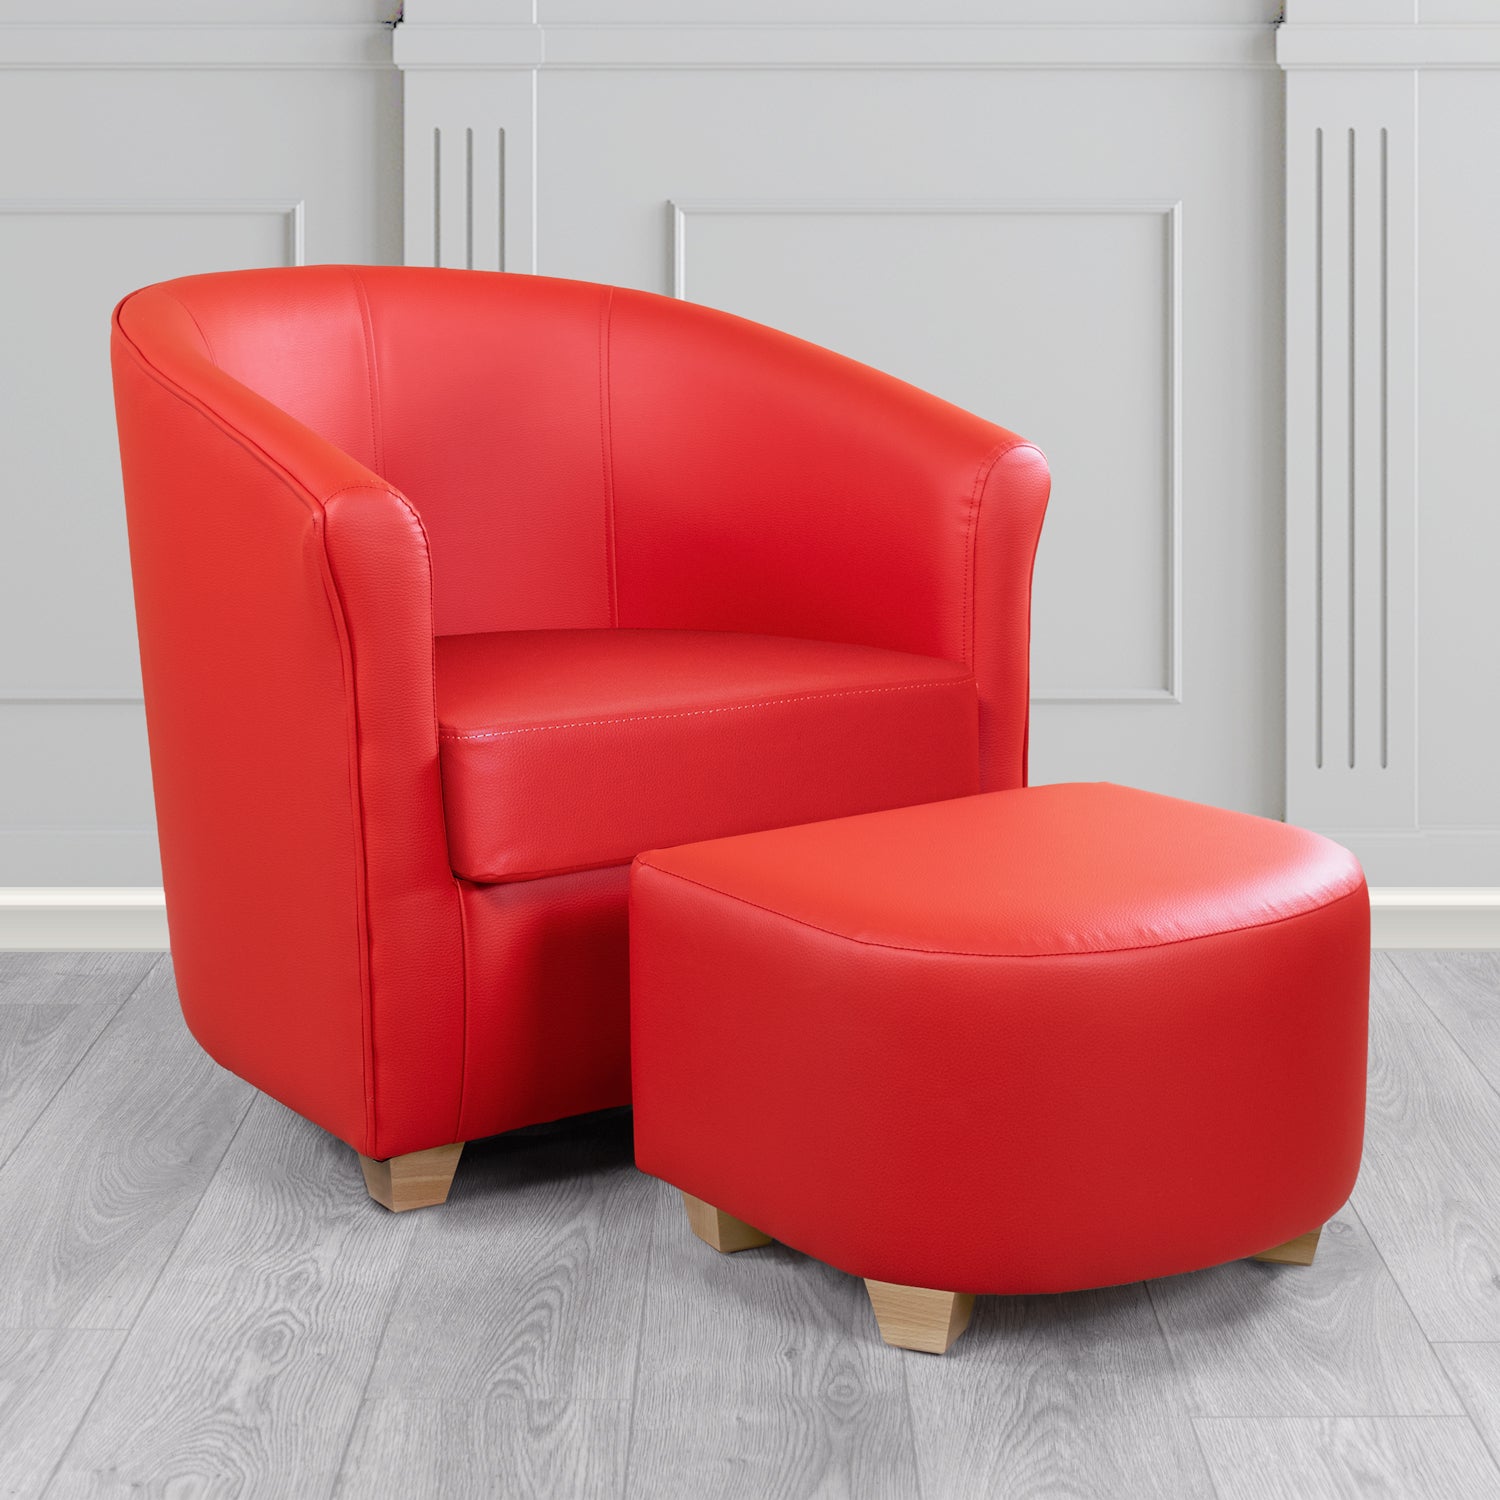 Cannes Tub Chair with Footstool Set in Madrid Rouge Faux Leather - The Tub Chair Shop